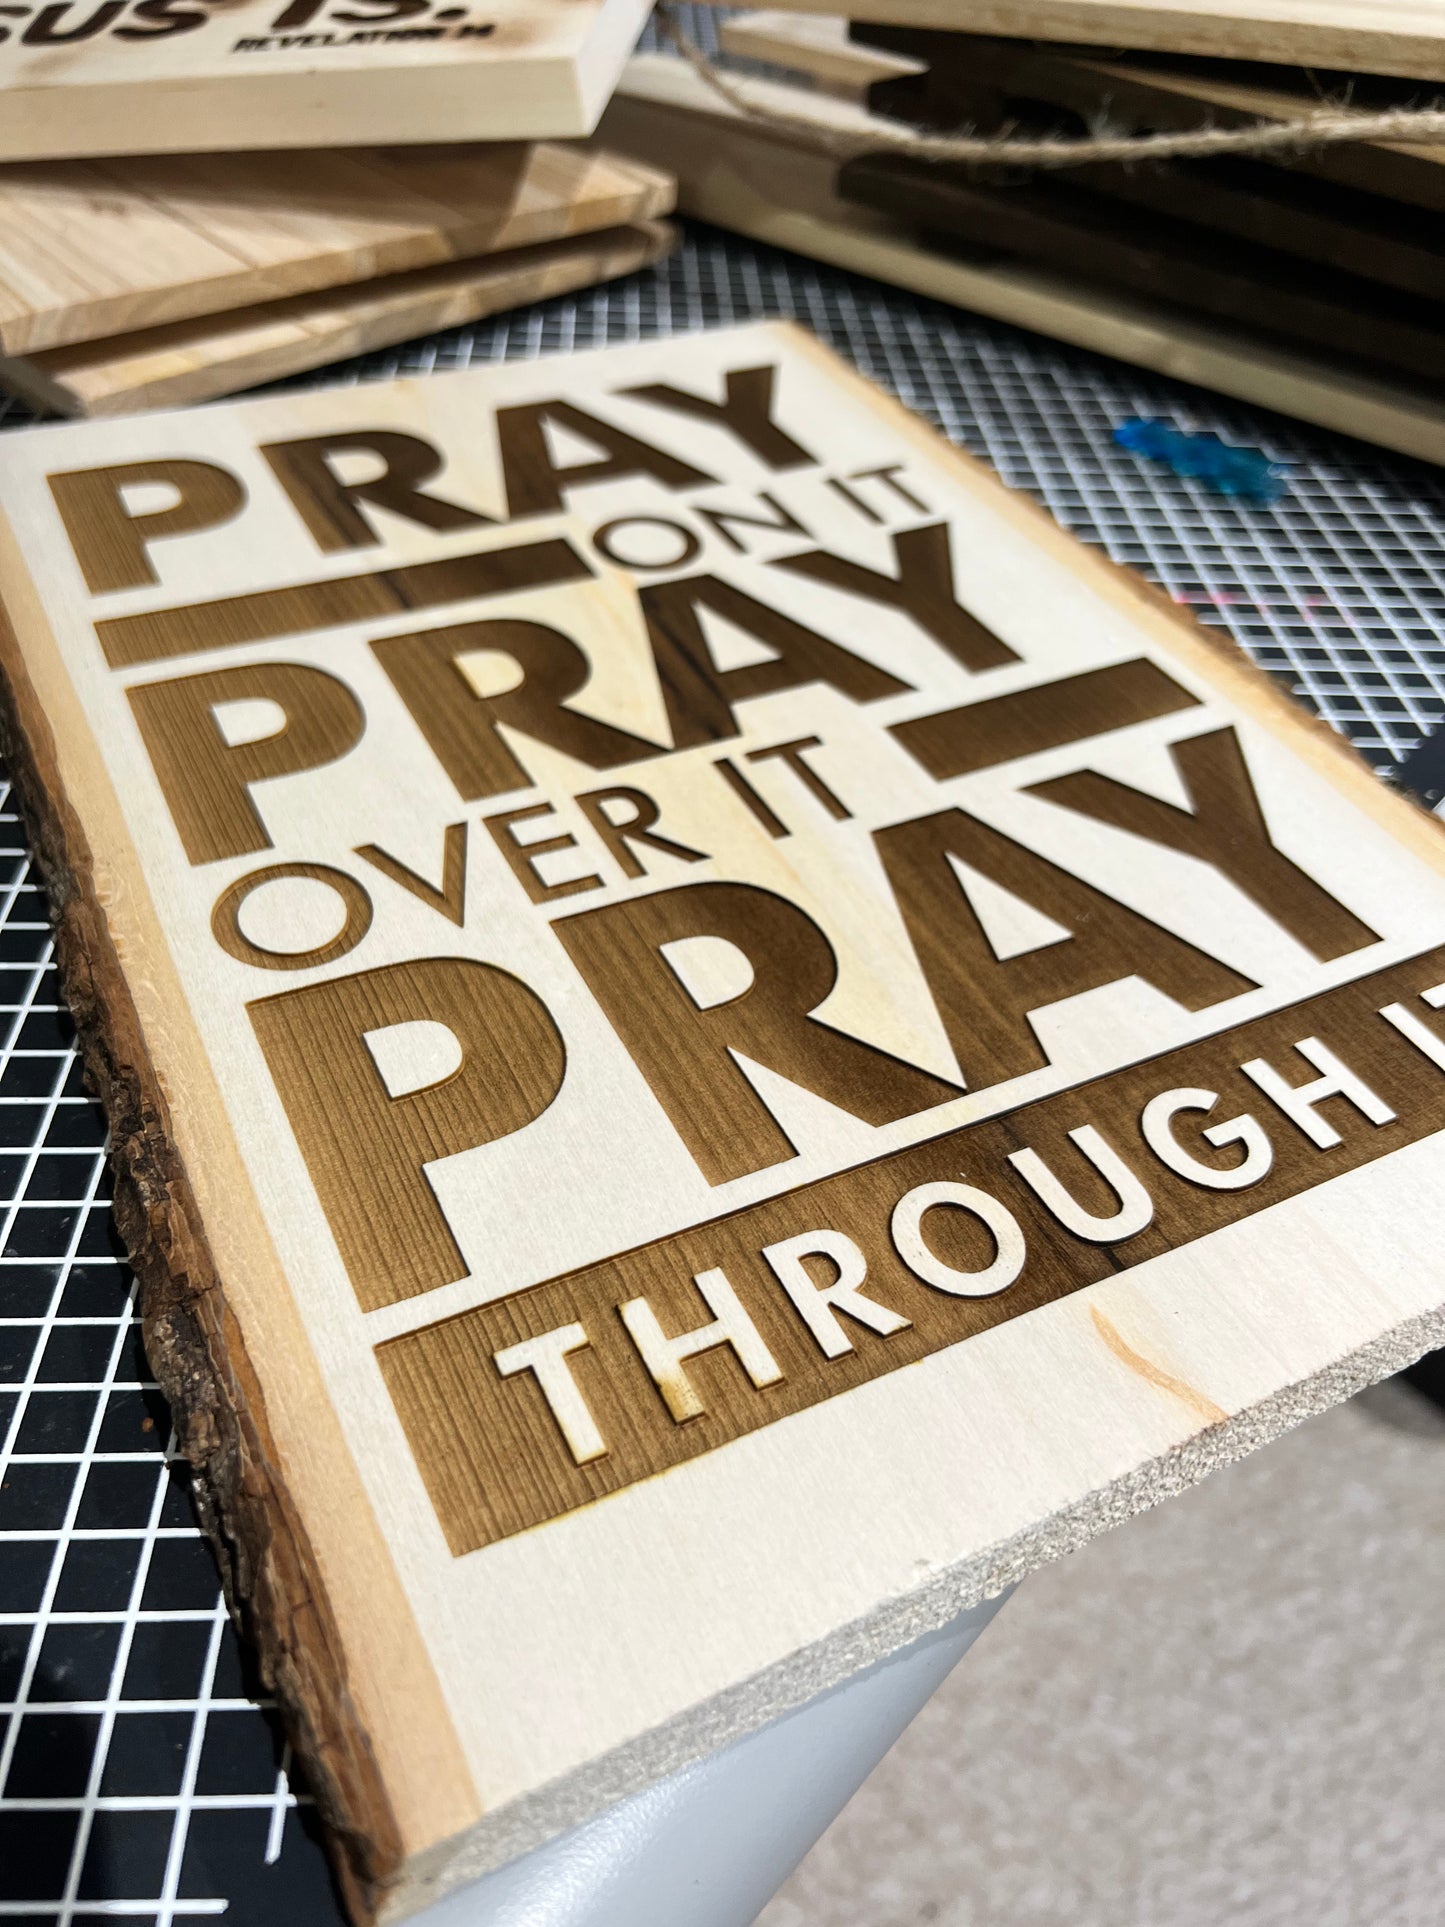 Pray on it Pray over it Engraved Wood Sign